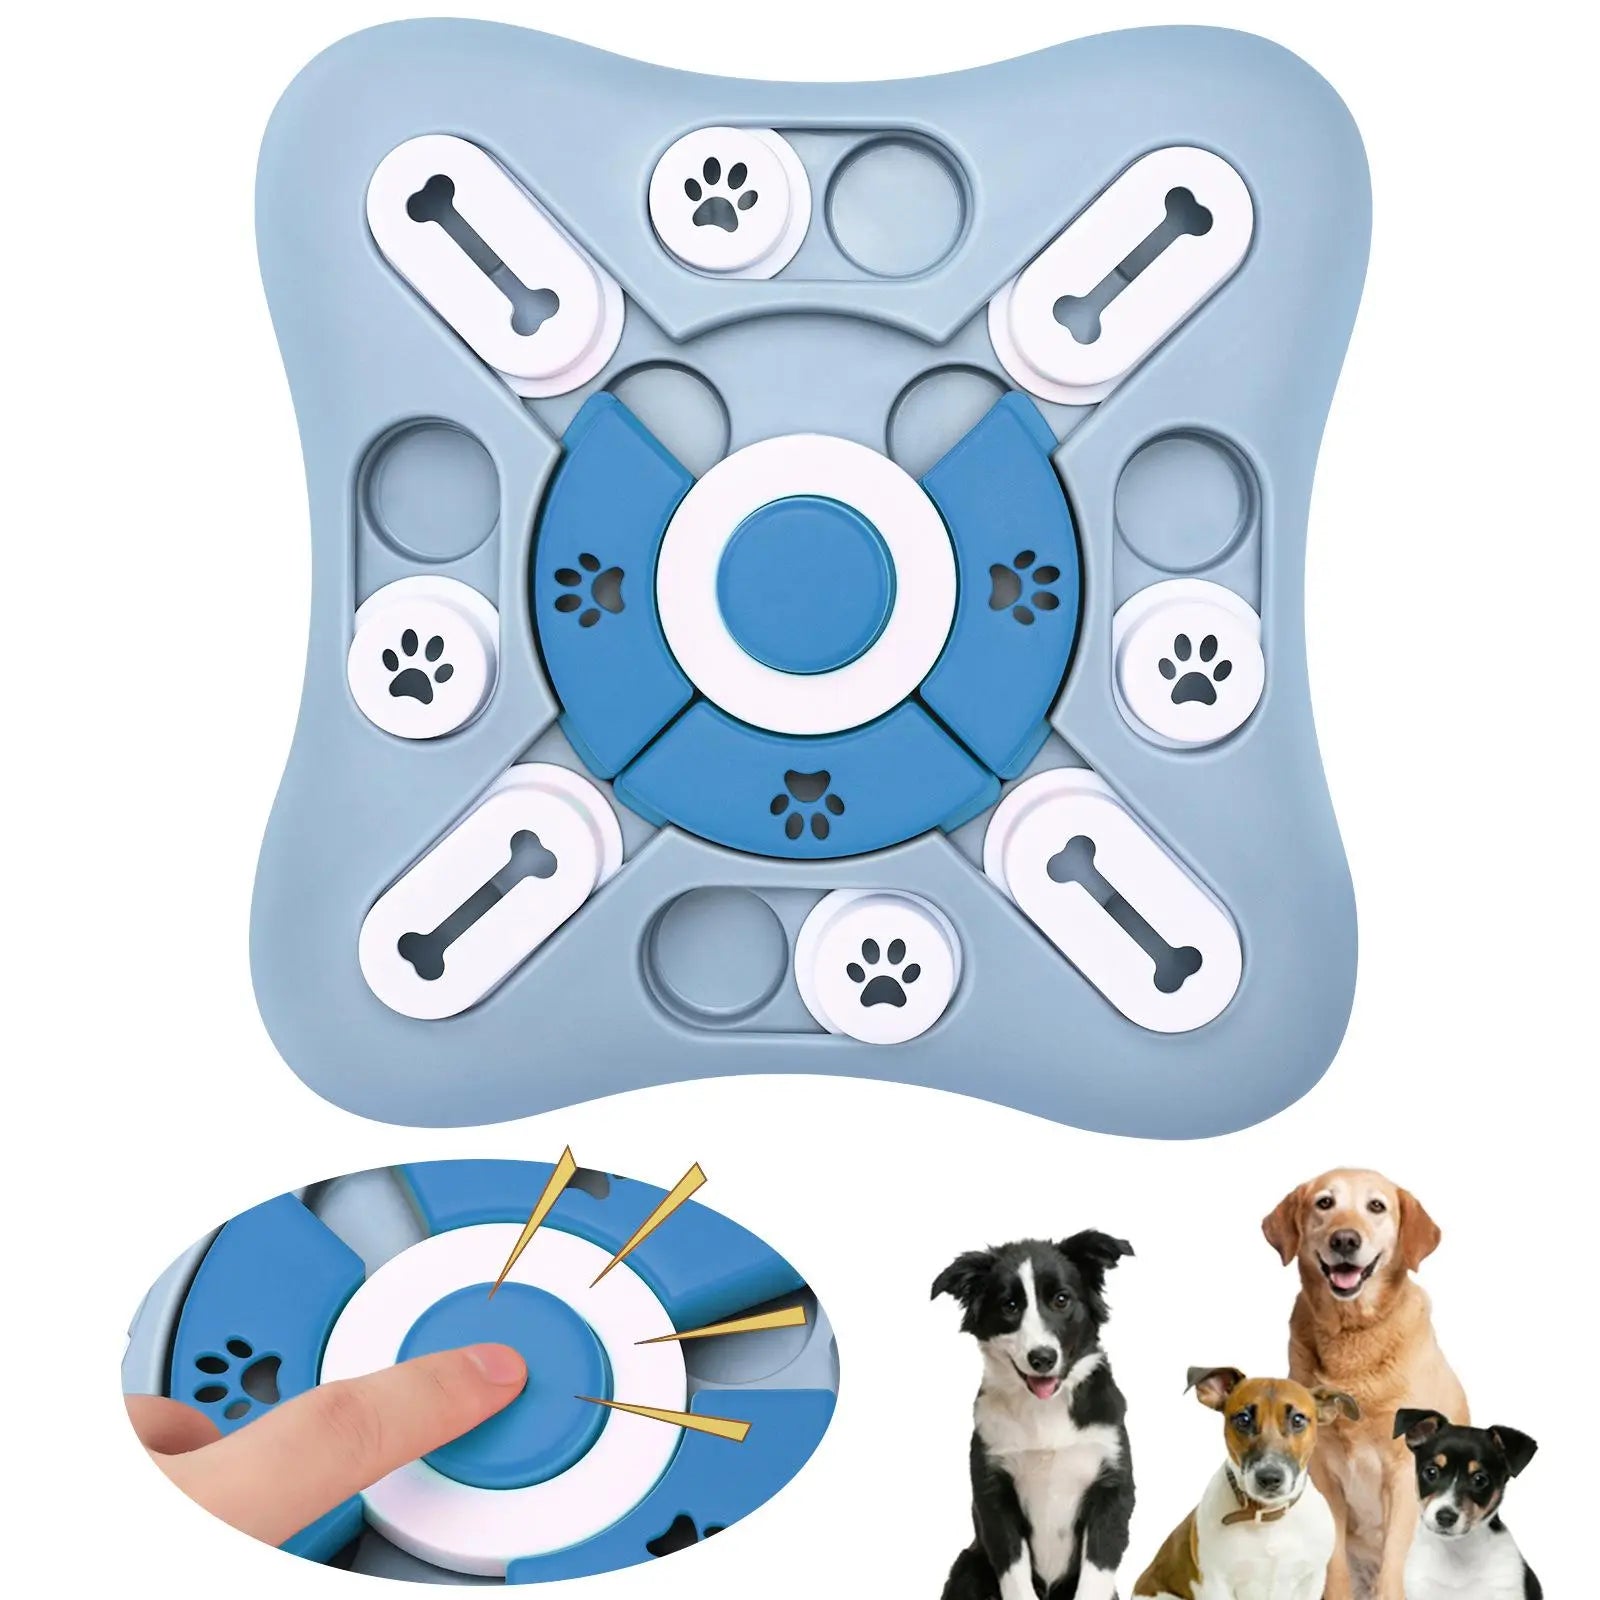 Interactive Dog Slow Feeder Toy: Engaging Pet Puzzle for Healthy Eating  petlums.com   